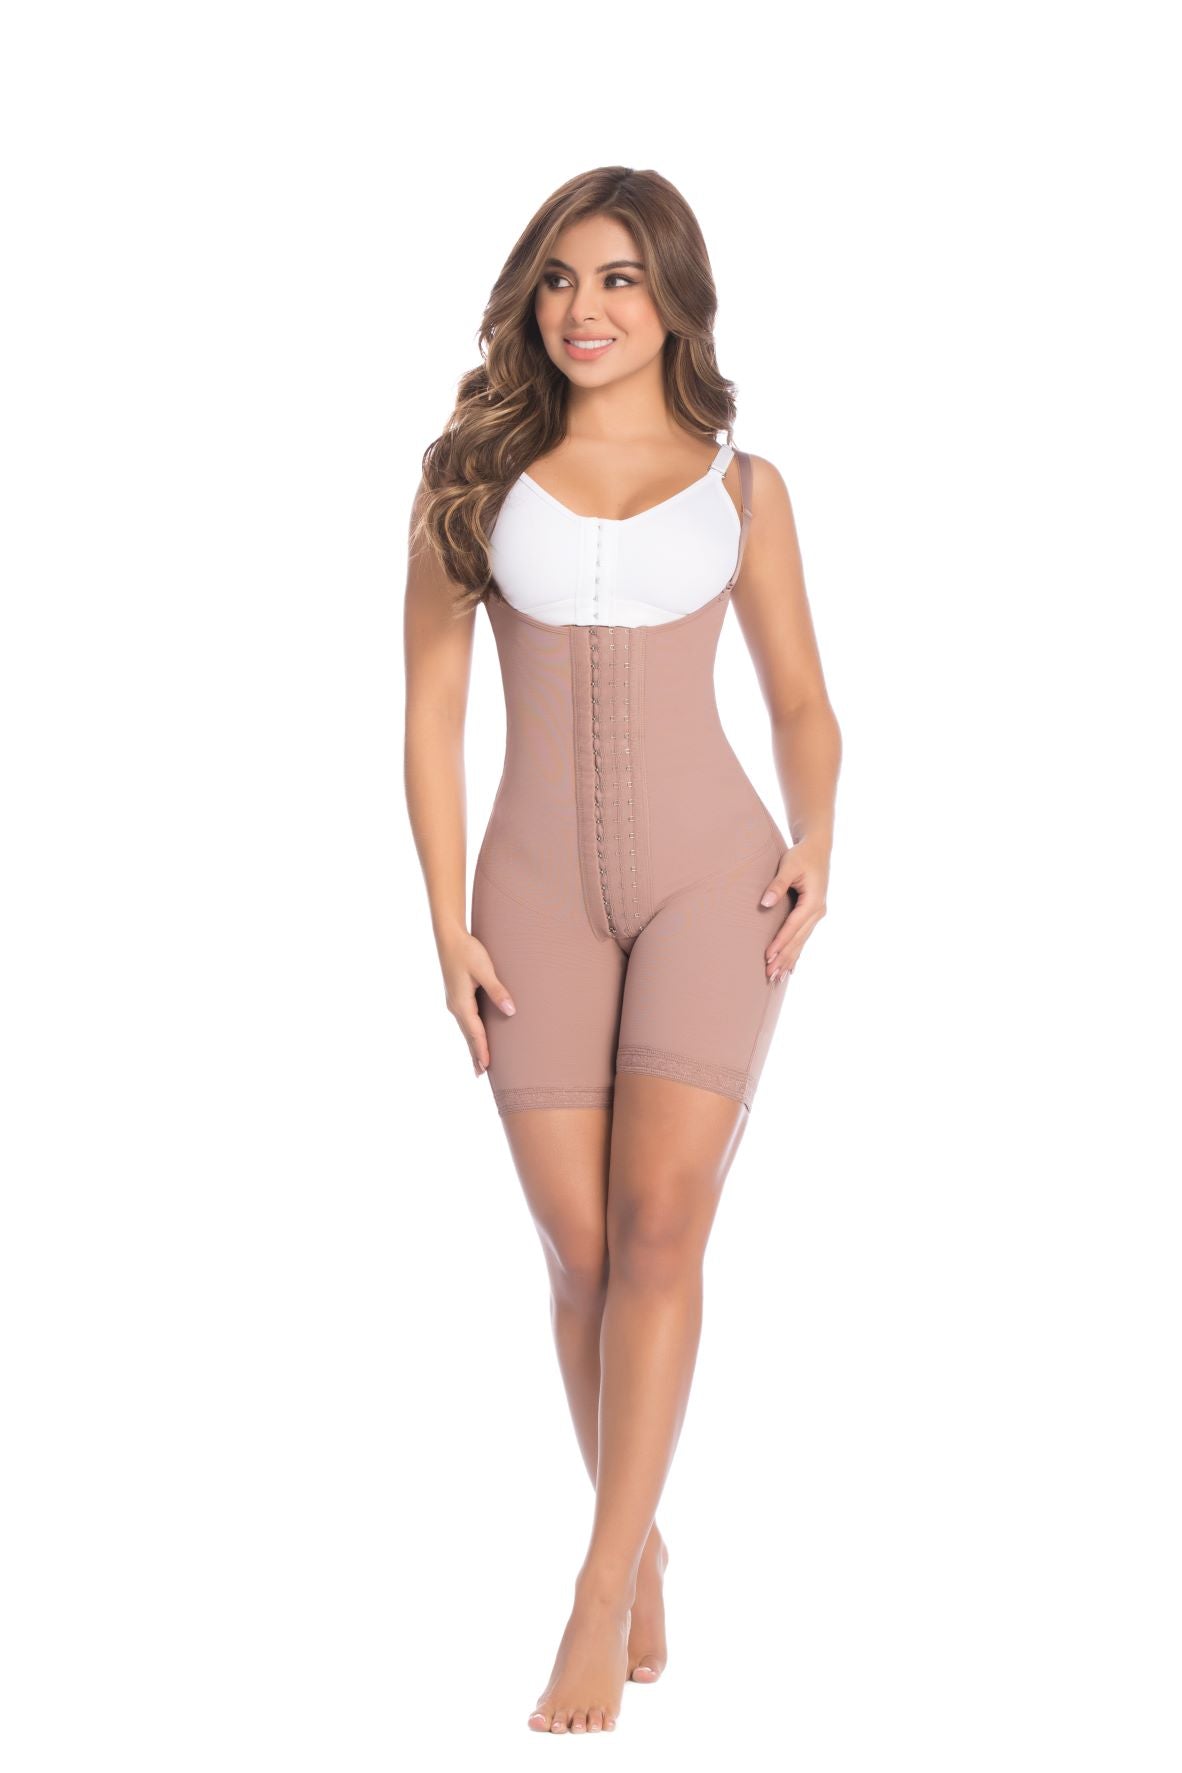 Faja M y D Mid-Thigh with Adjustable Straps